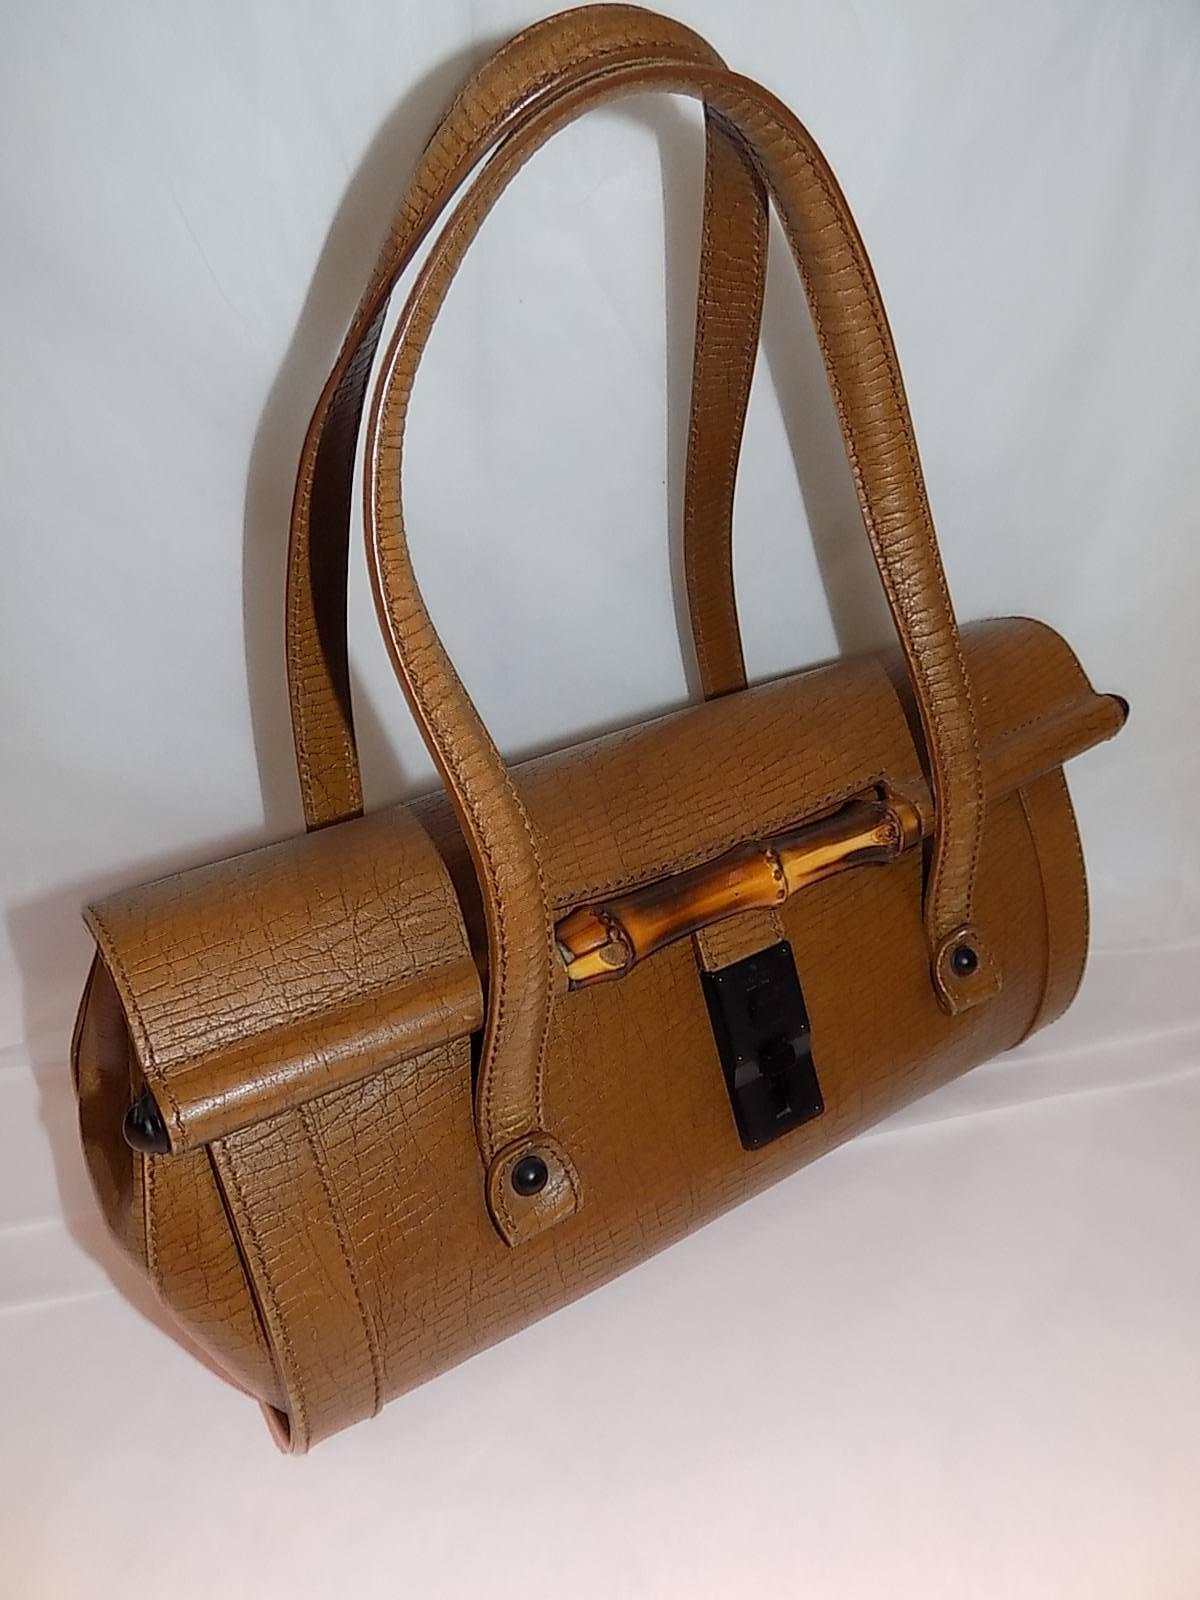 Brown distressed leather Gucci Bamboo Bullet Bag with dual shoulder straps, bamboo detail at front, brown leather interior lining, single zip pocket at interior wall and push-lock closure at front flap. Pristine Condition .
 Measurements: Shoulder